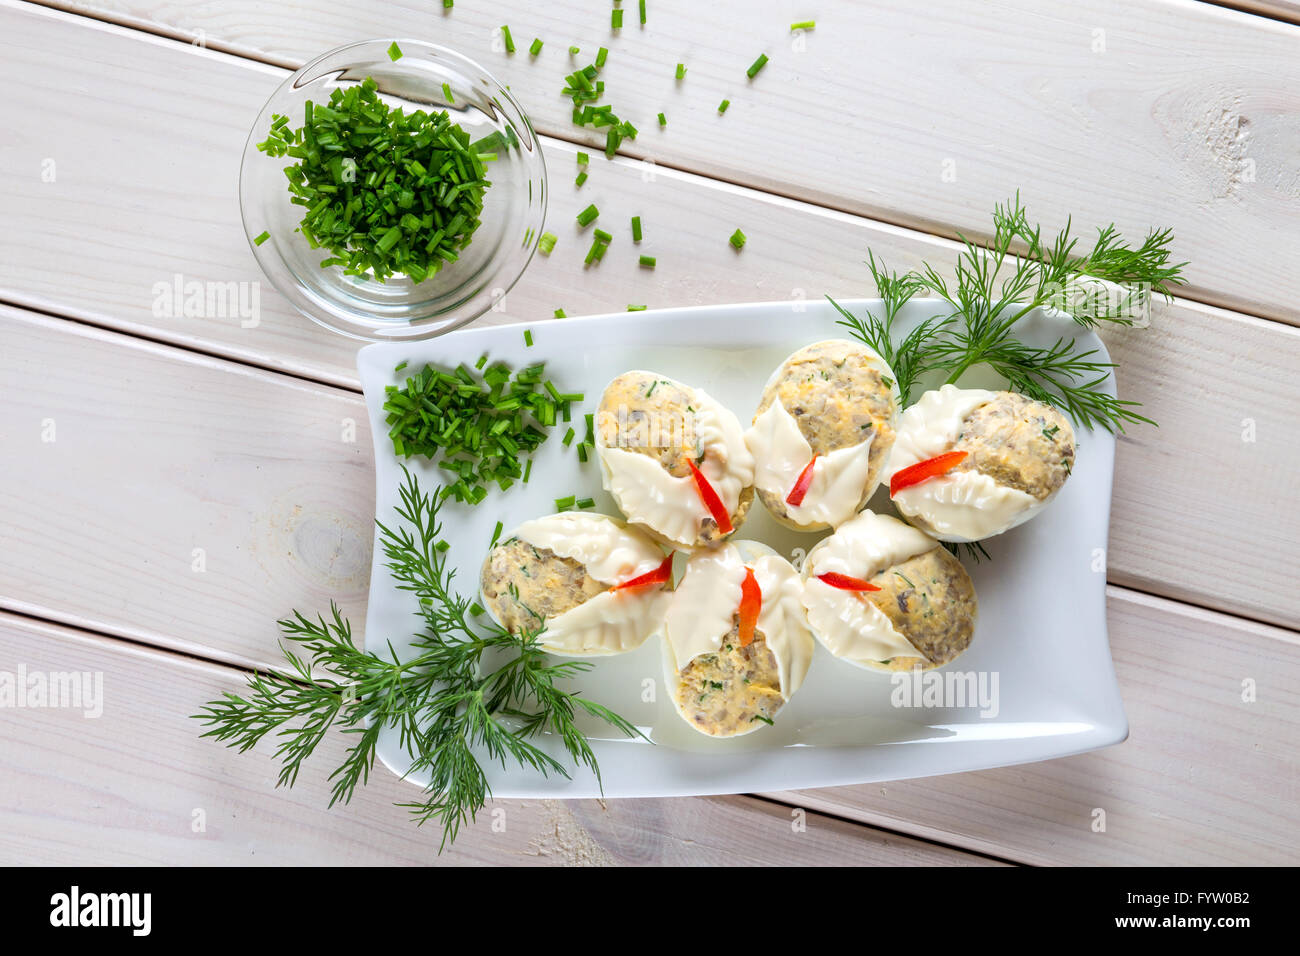 Dish with hard boiled eggs in mayonnaise parsley nad chopped chives, on white plank background Stock Photo